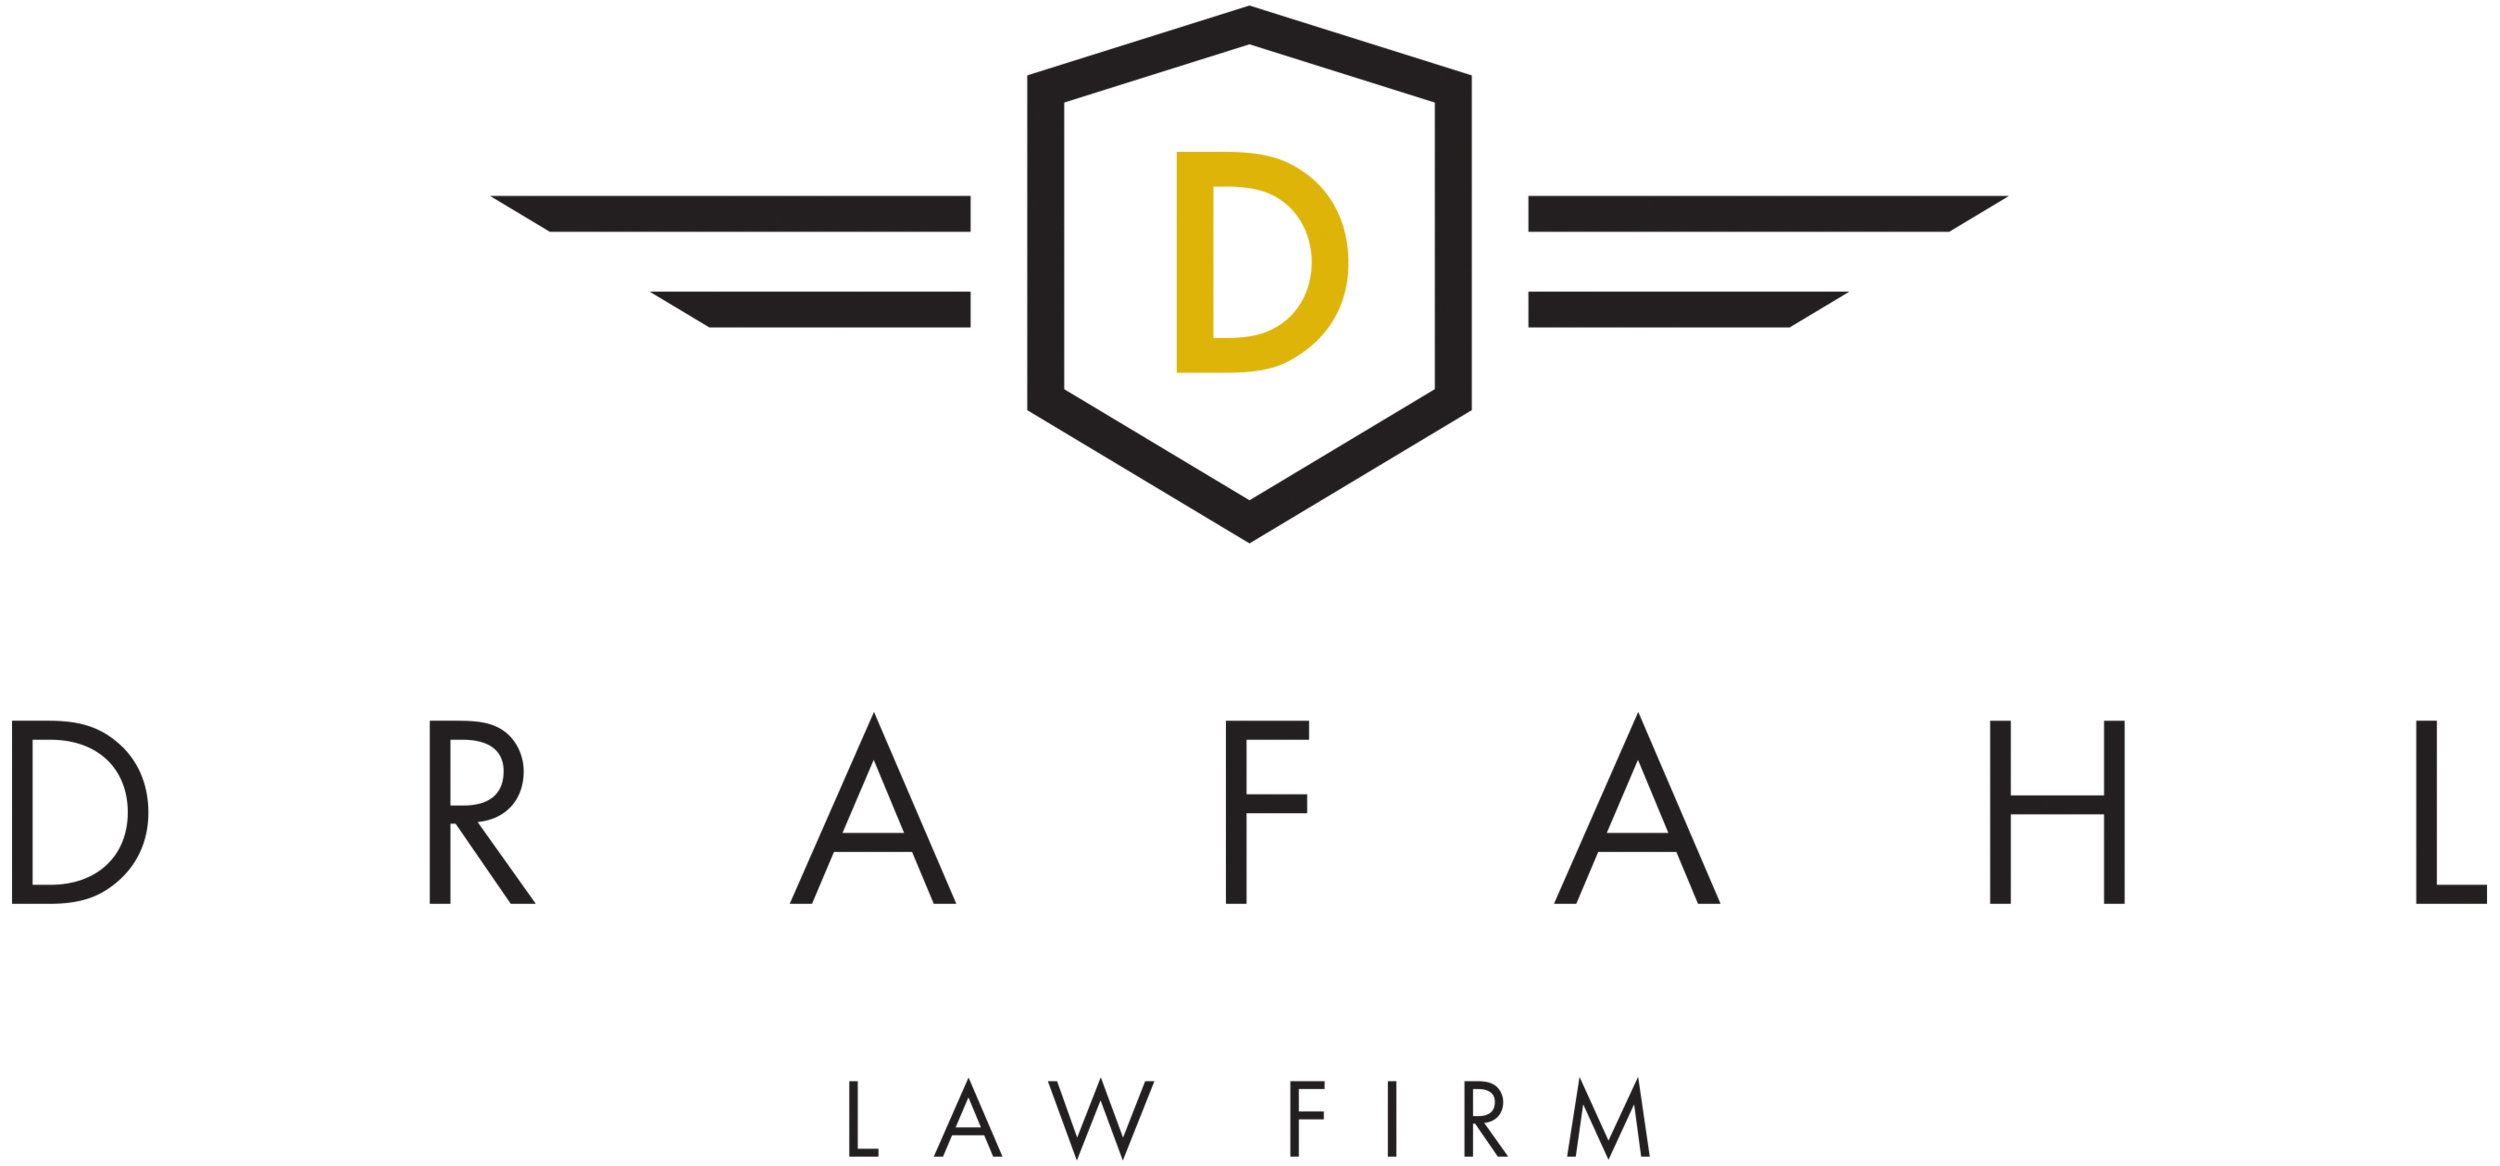 Drafahl Law Firm | St. Louis Personal Injury Lawyer